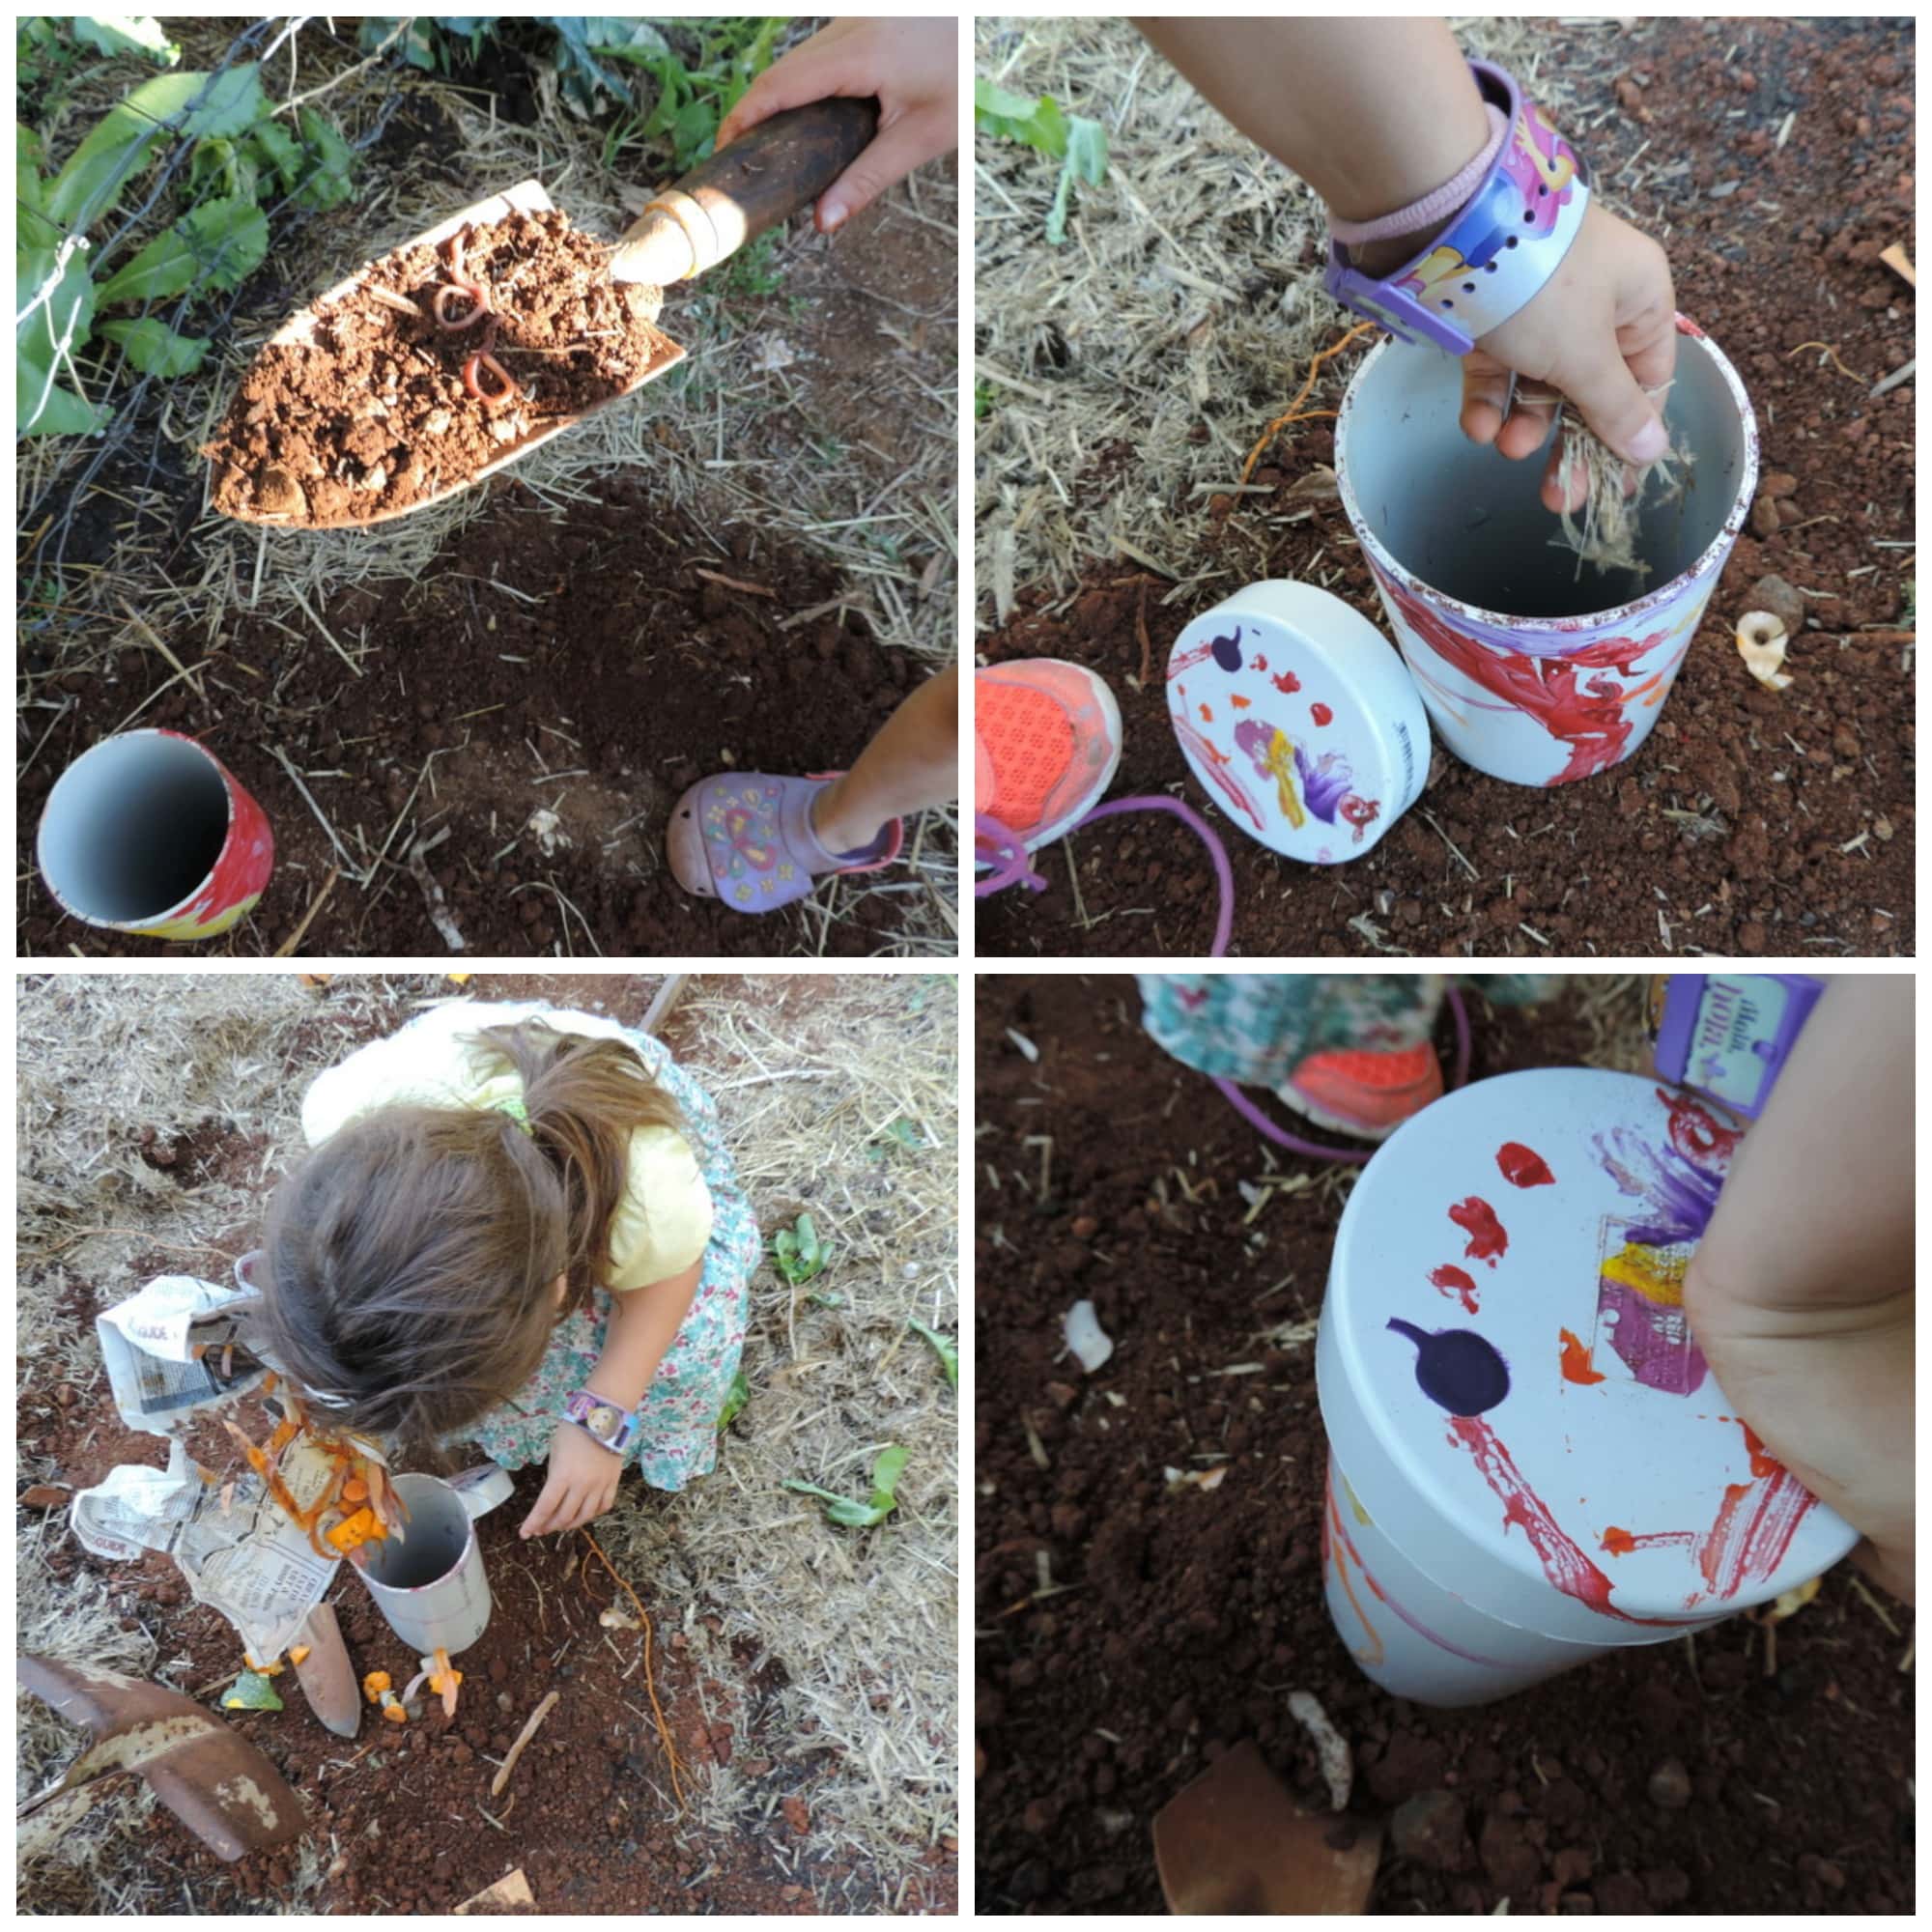 The Empowered Educator show us why making a Worm Farm with children is simple to do yet provides numerous early learning outcomes. It's also a whole lot of fun!